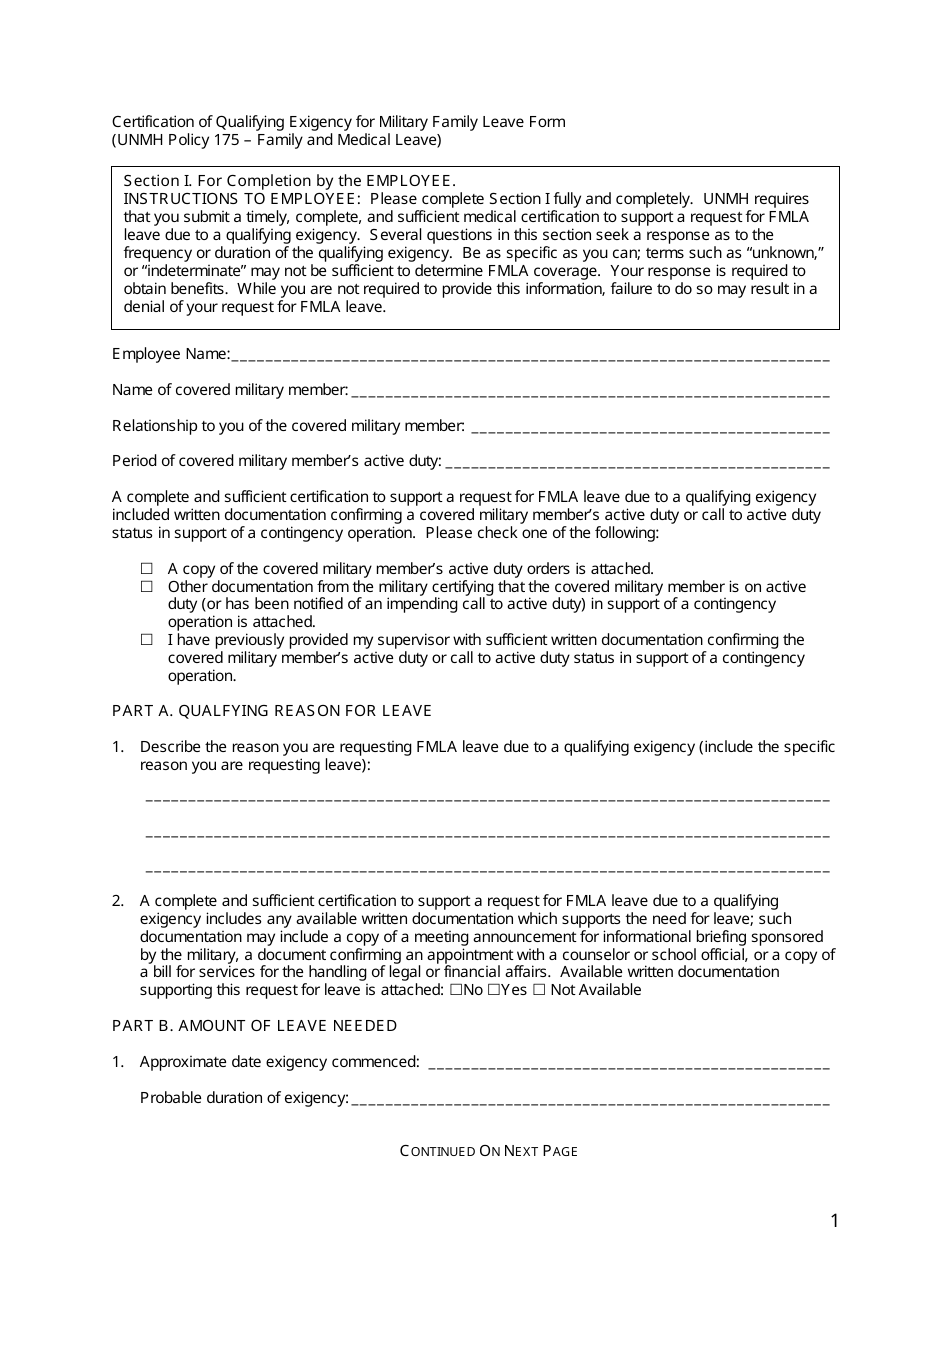 Certification of Qualifying Exigency for Military Family Leave Form - New Mexico, Page 1